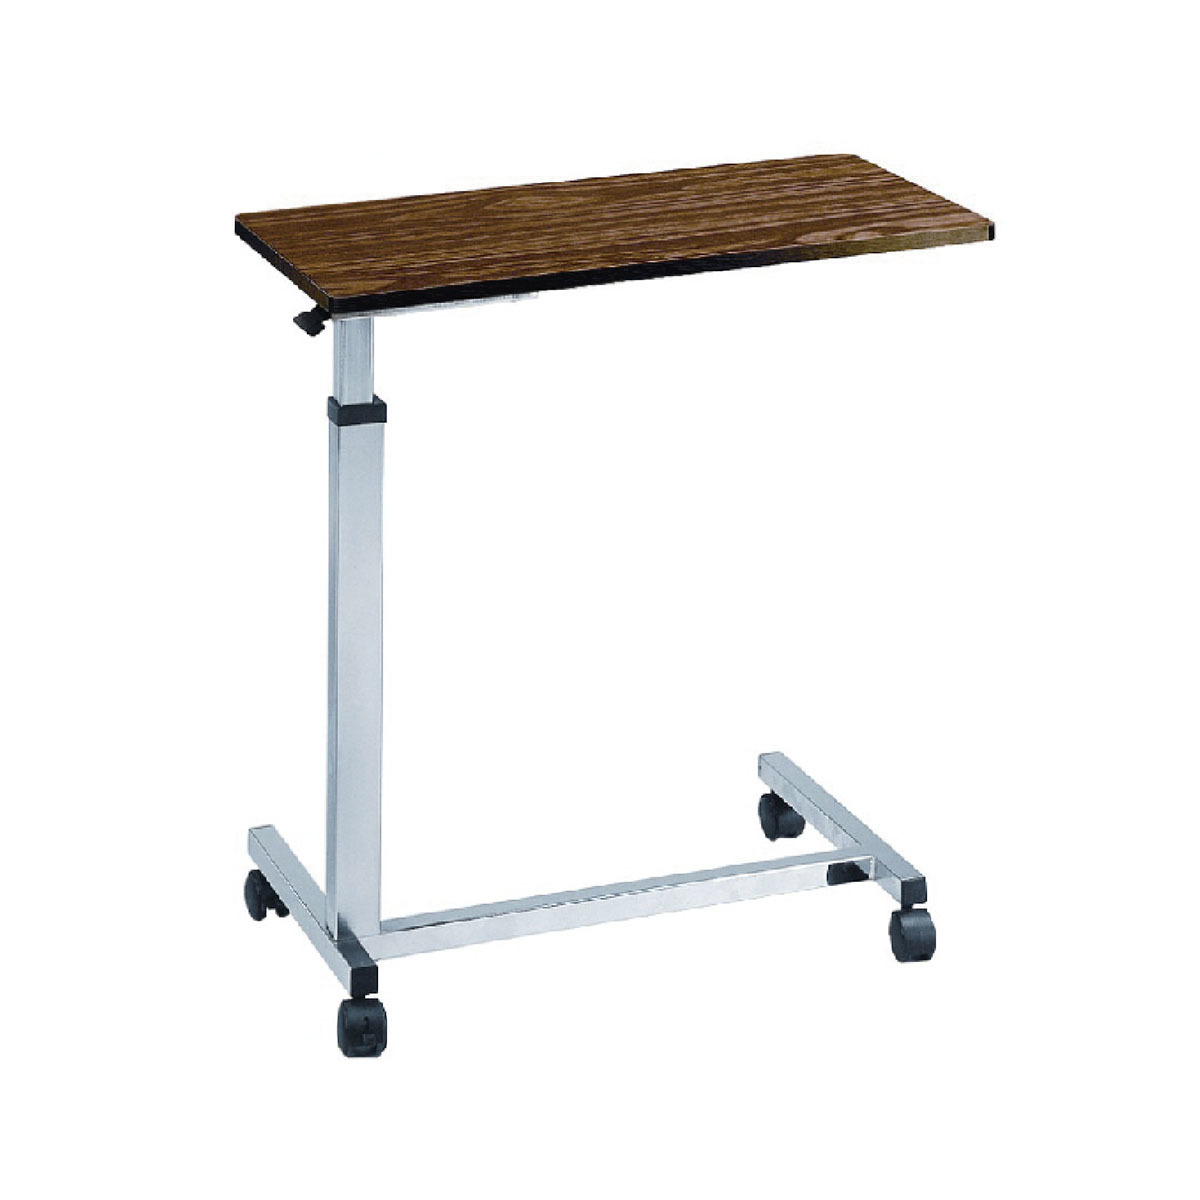 HL-D612B Over bed table